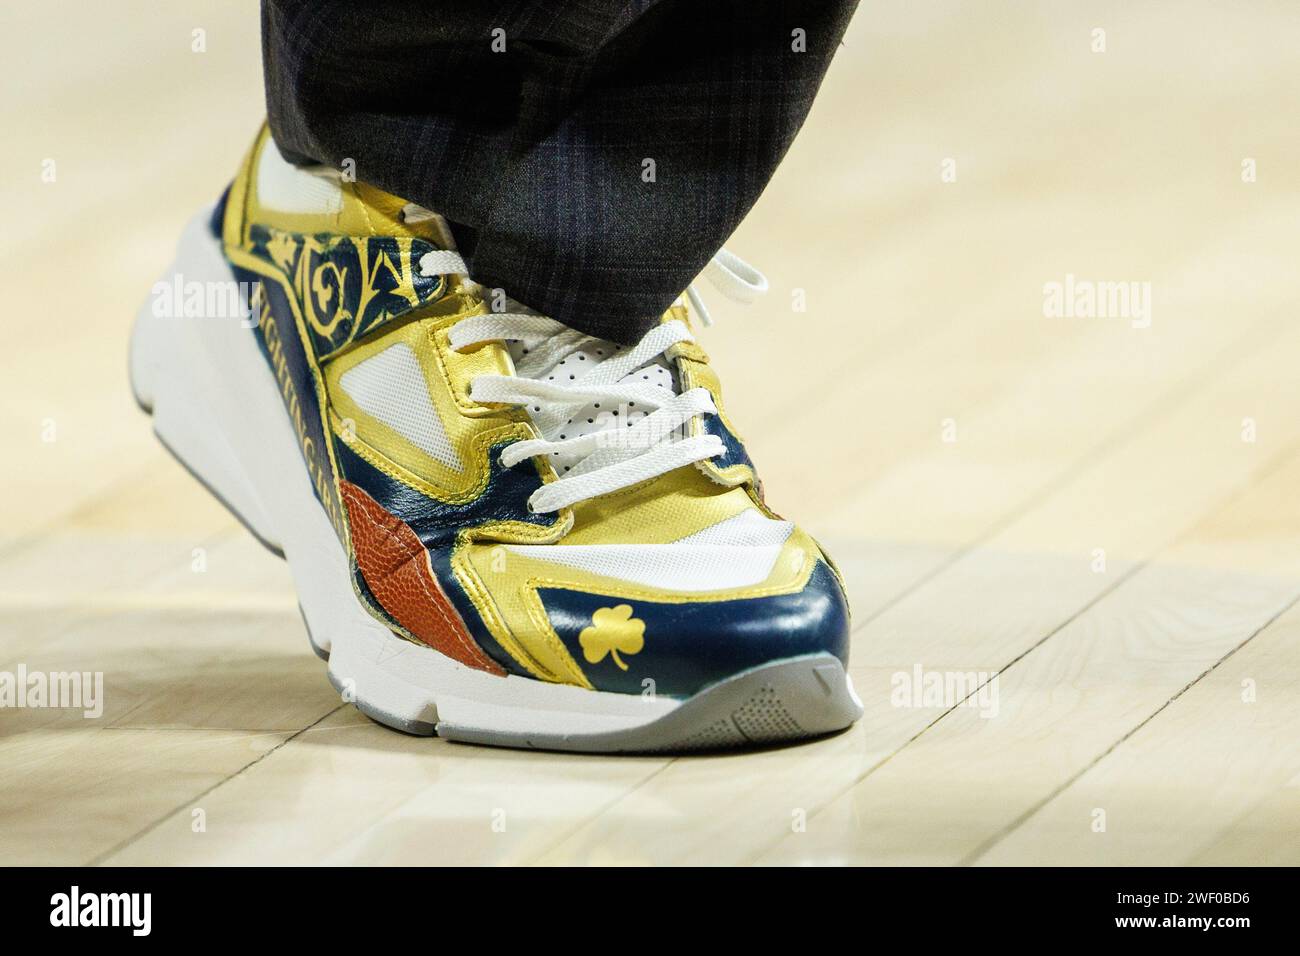 january 27 2024 notre dame head coach micah shrewsberry wearing custom sneakers for coaches vs cancer during ncaa basketball game action between the boston college eagles and the notre dame fighting irish at purcell pavilion at the joyce center in south bend indiana john mersitscsm credit image john mersitscal sport media 2WF0BD6